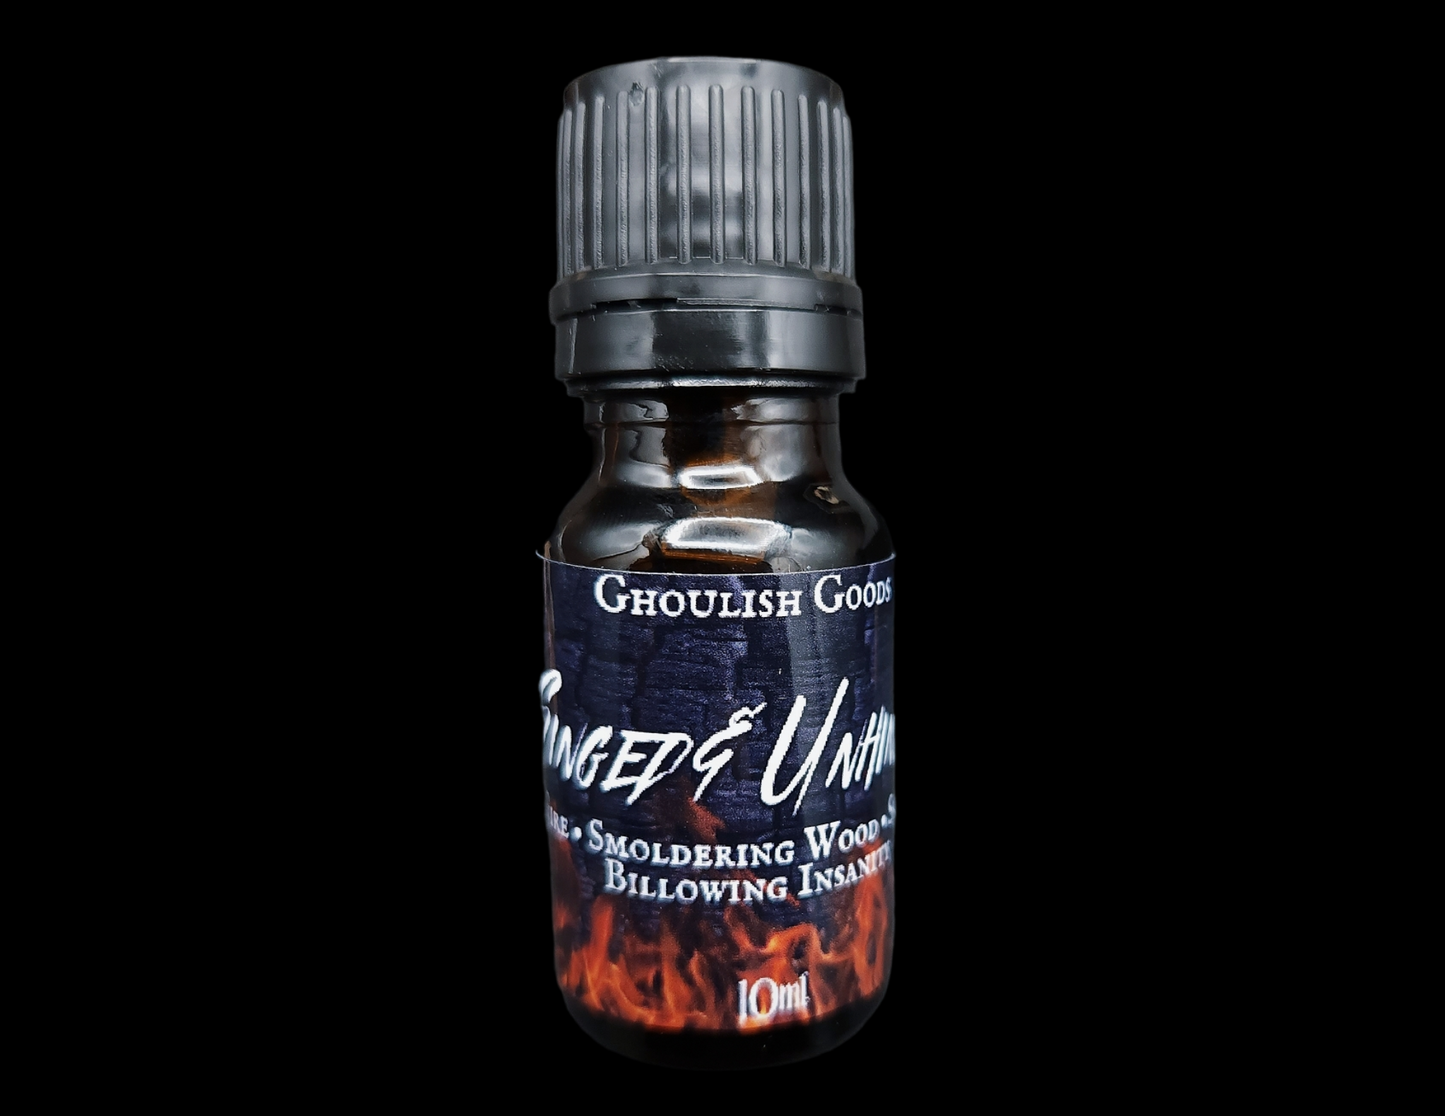 Singed and Unhinged Perfume Oil